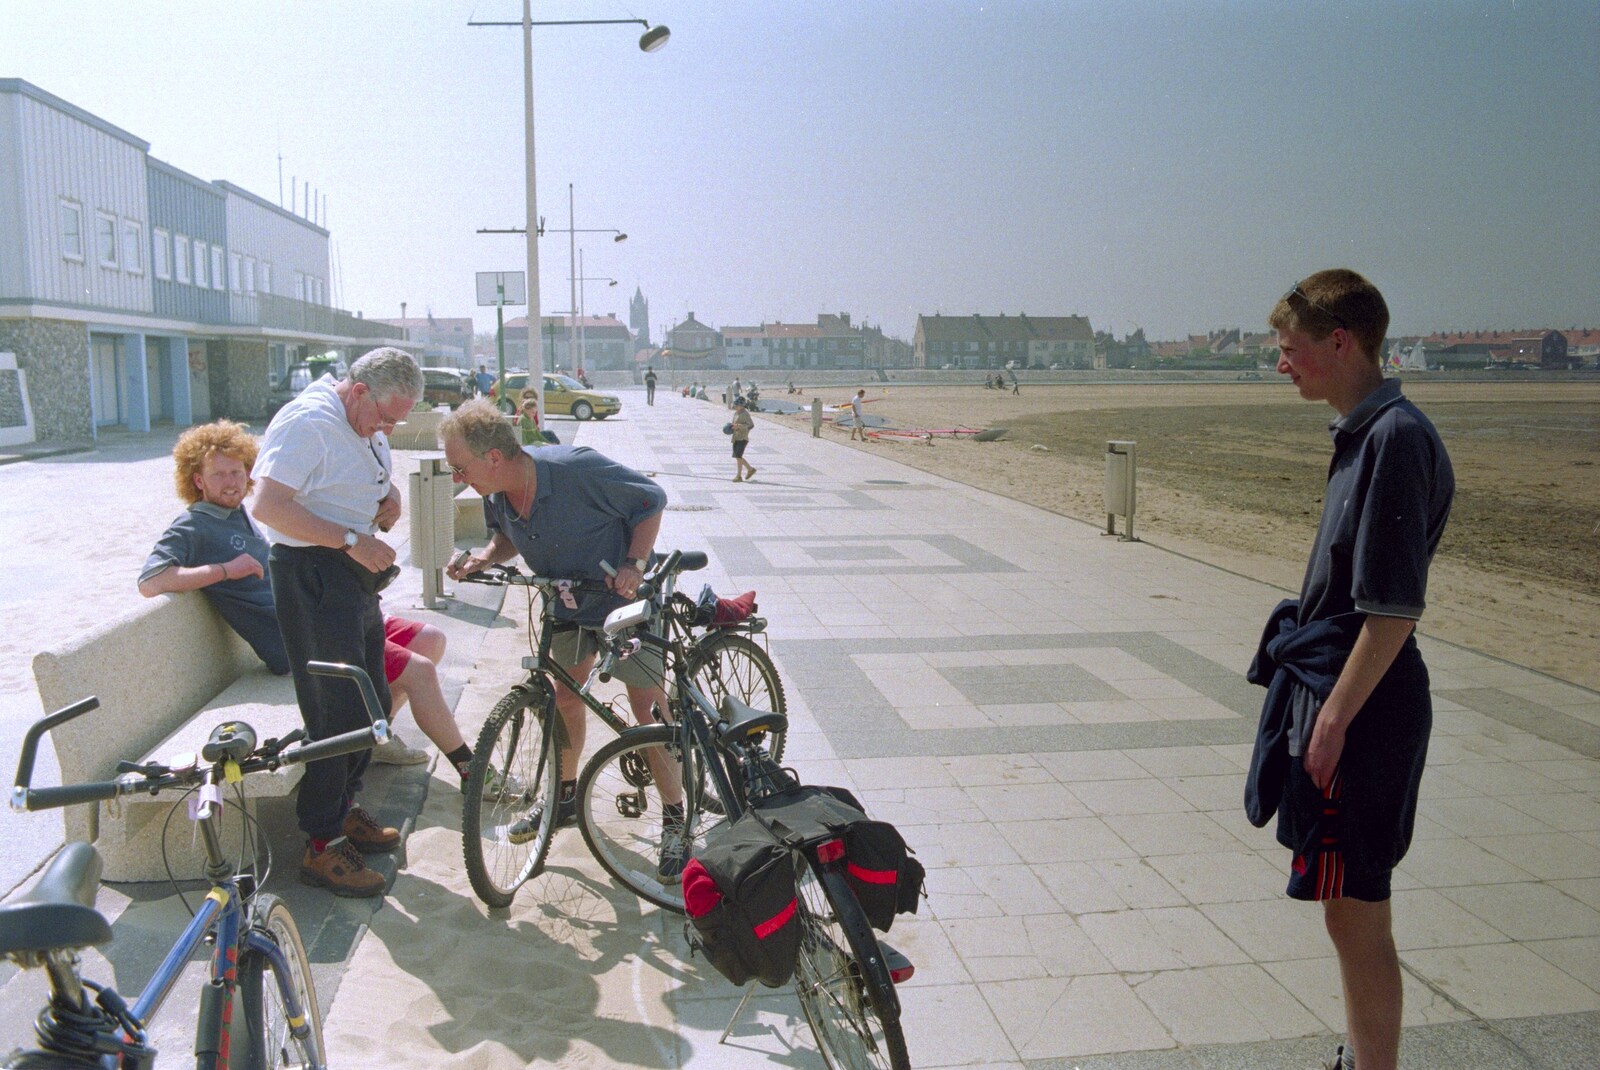 Hanging out on the seafront from A BSCC Bike Ride to Gravelines, Pas de Calais, France - 11th May 2000